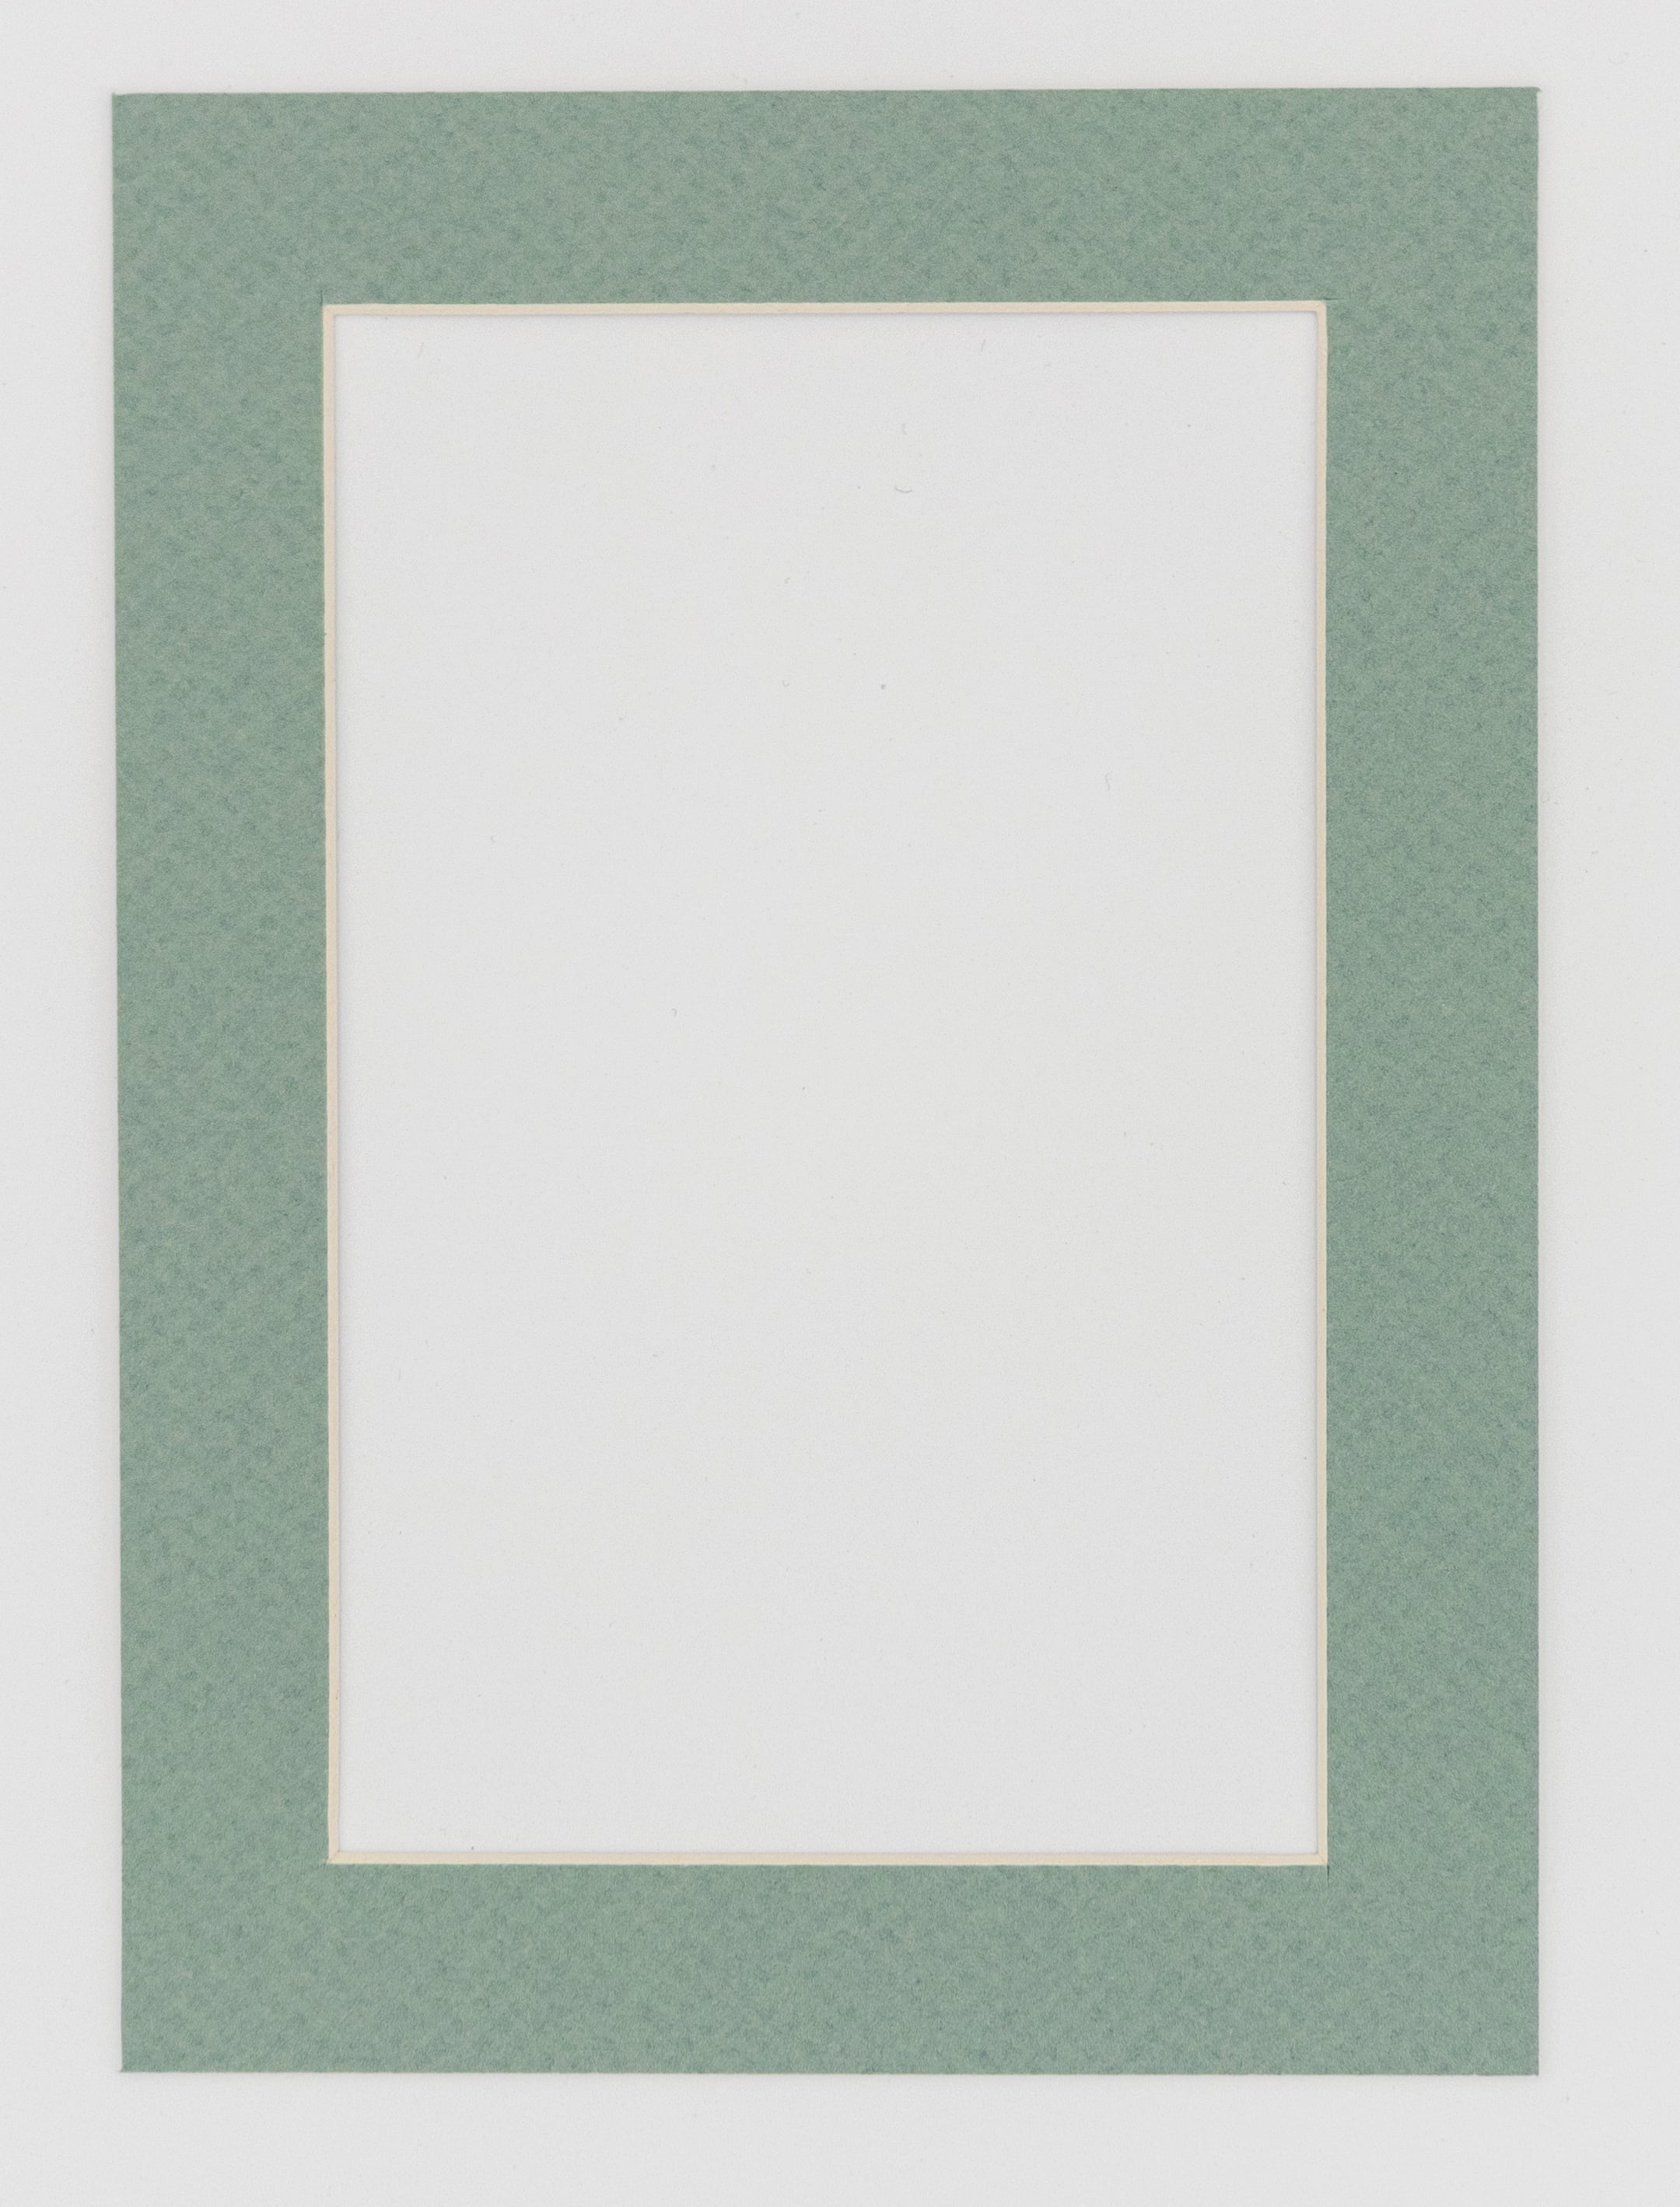 Photo Mat Board 14 x 18 inches Frame for 10 x 13 inches Photo Art Size White Core/White PA Framing